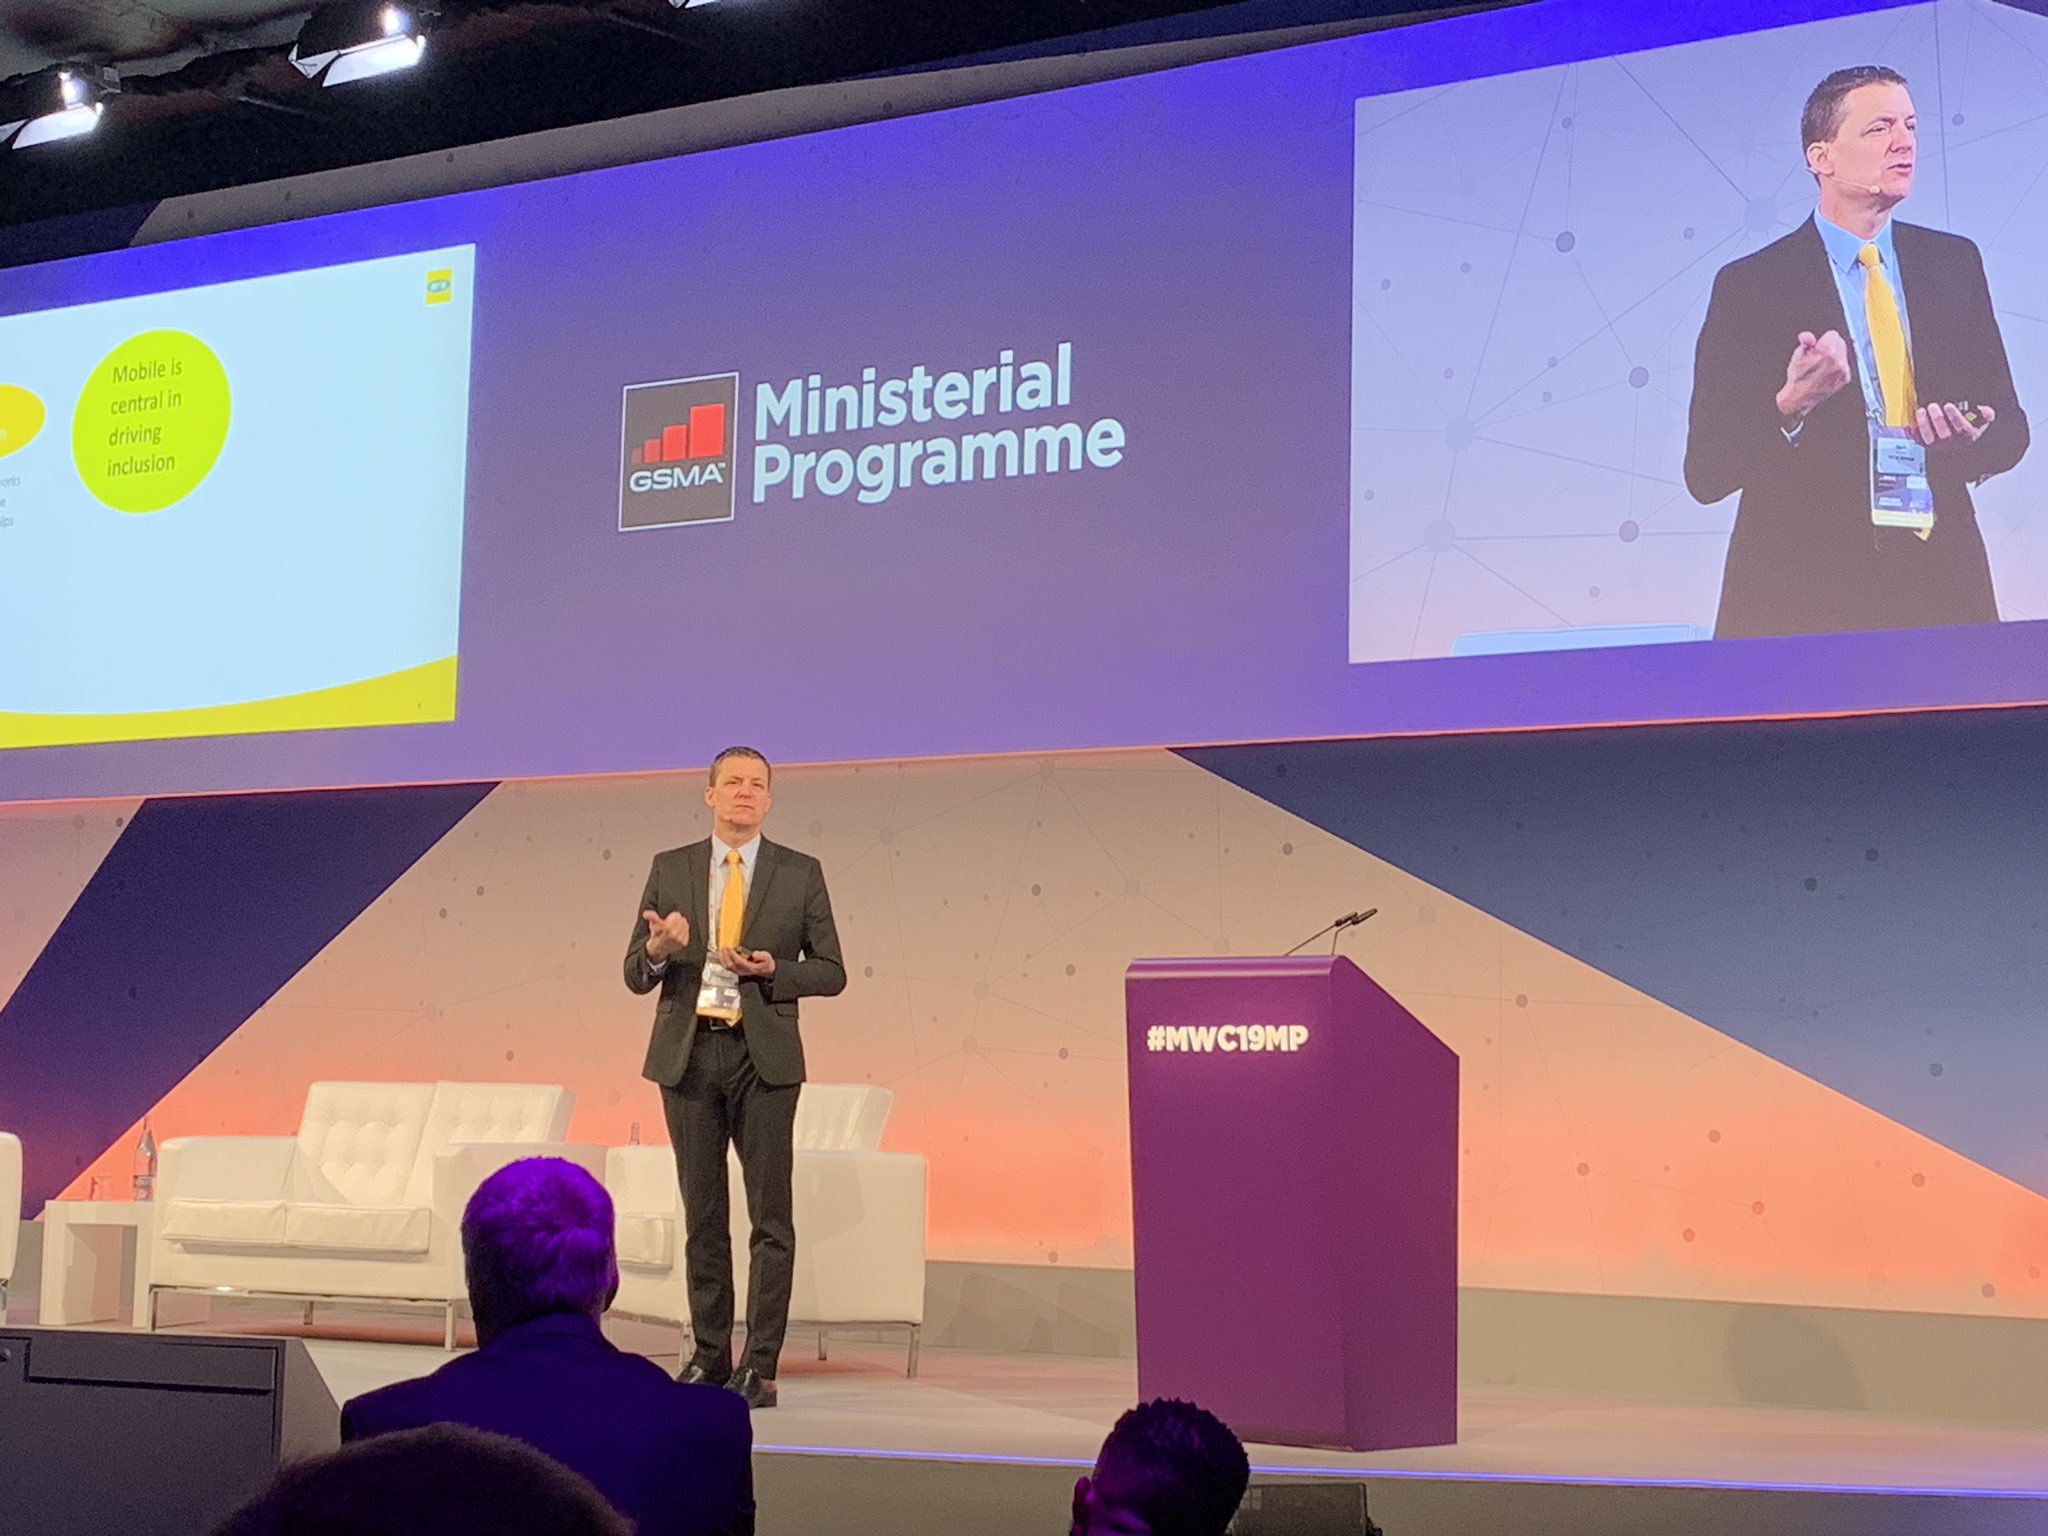 Rob Shuter in the Ministerial Programme 2019